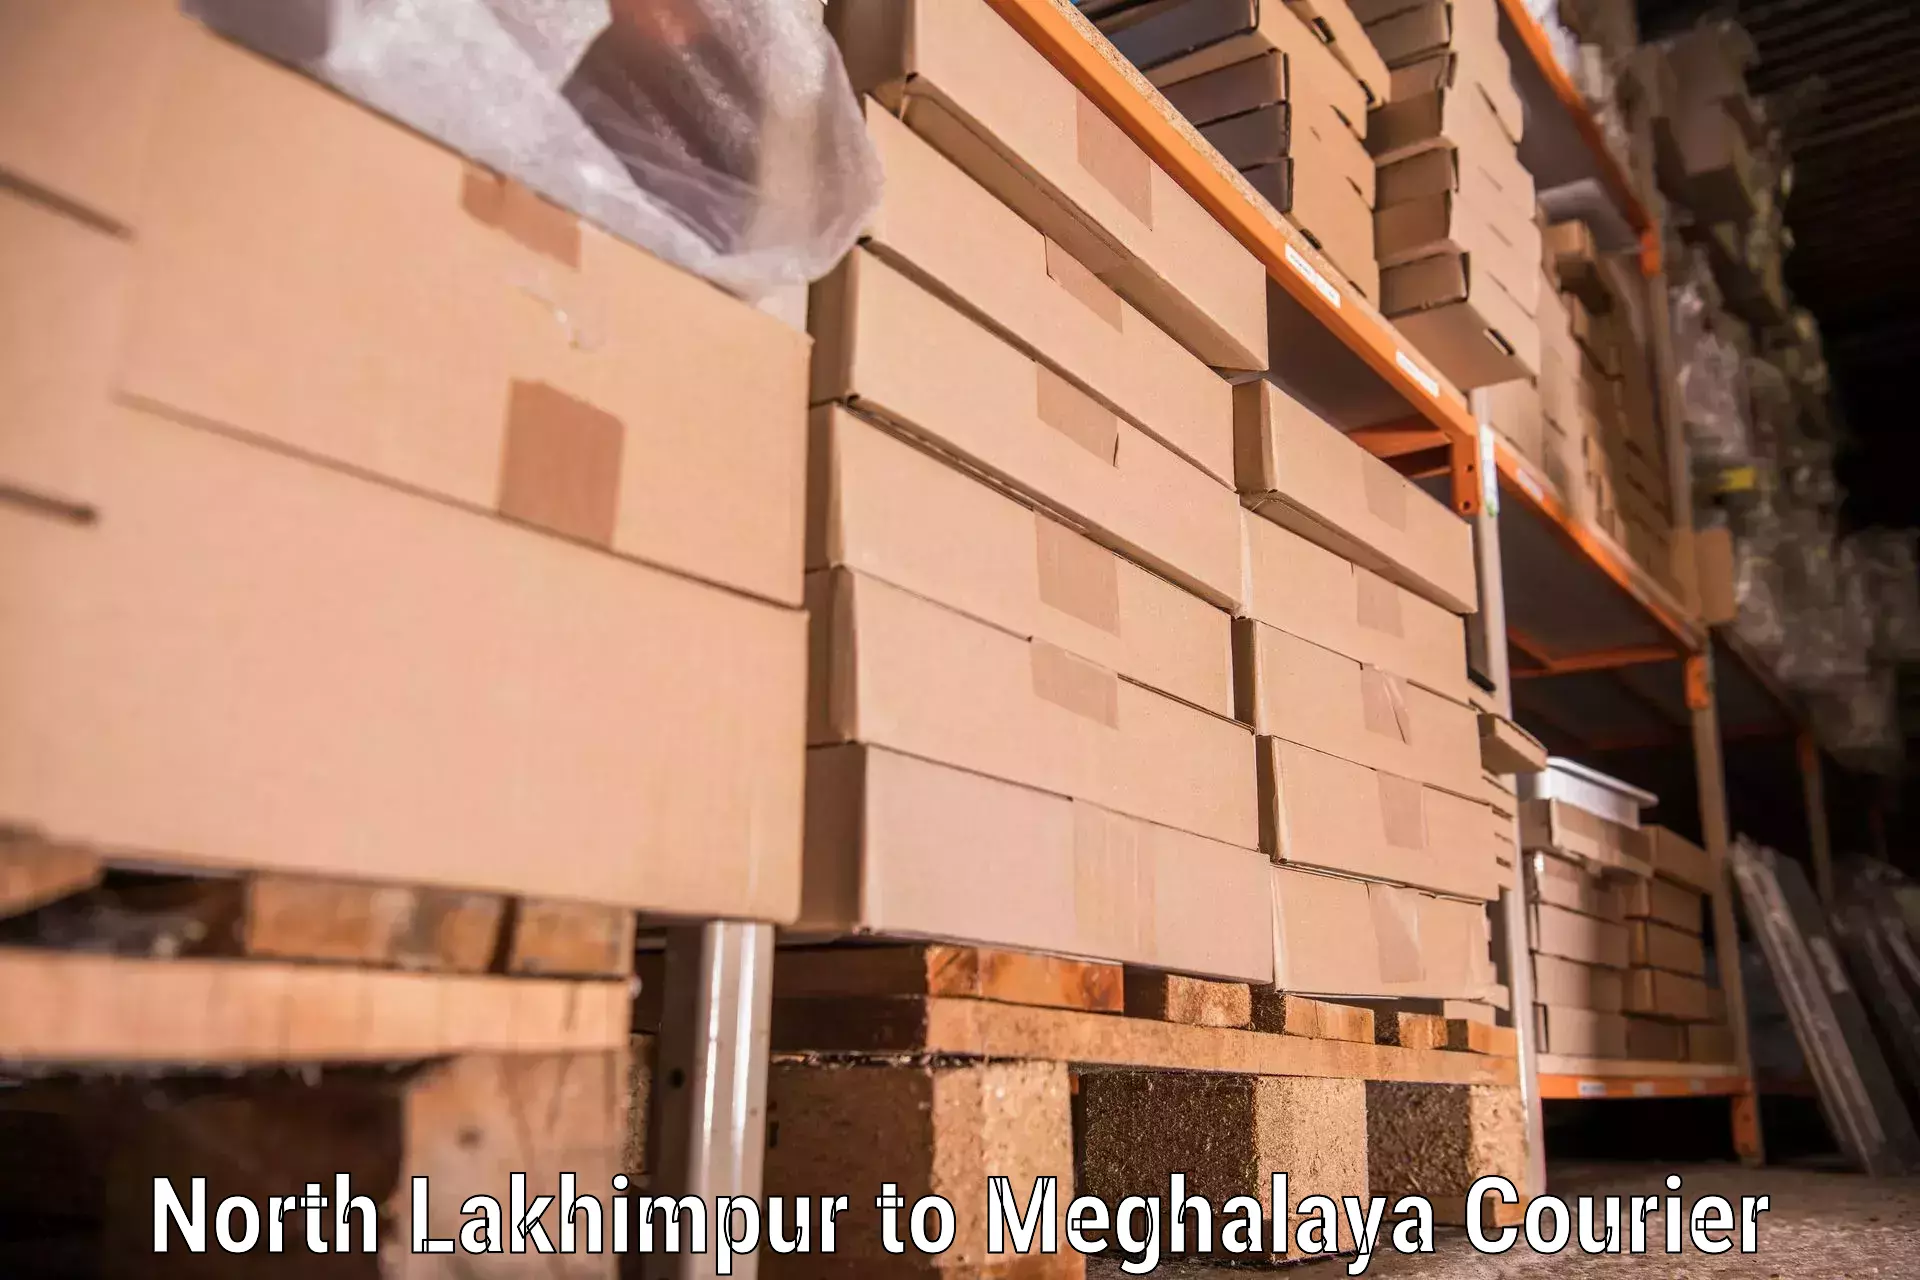 High-quality moving services in North Lakhimpur to Cherrapunji